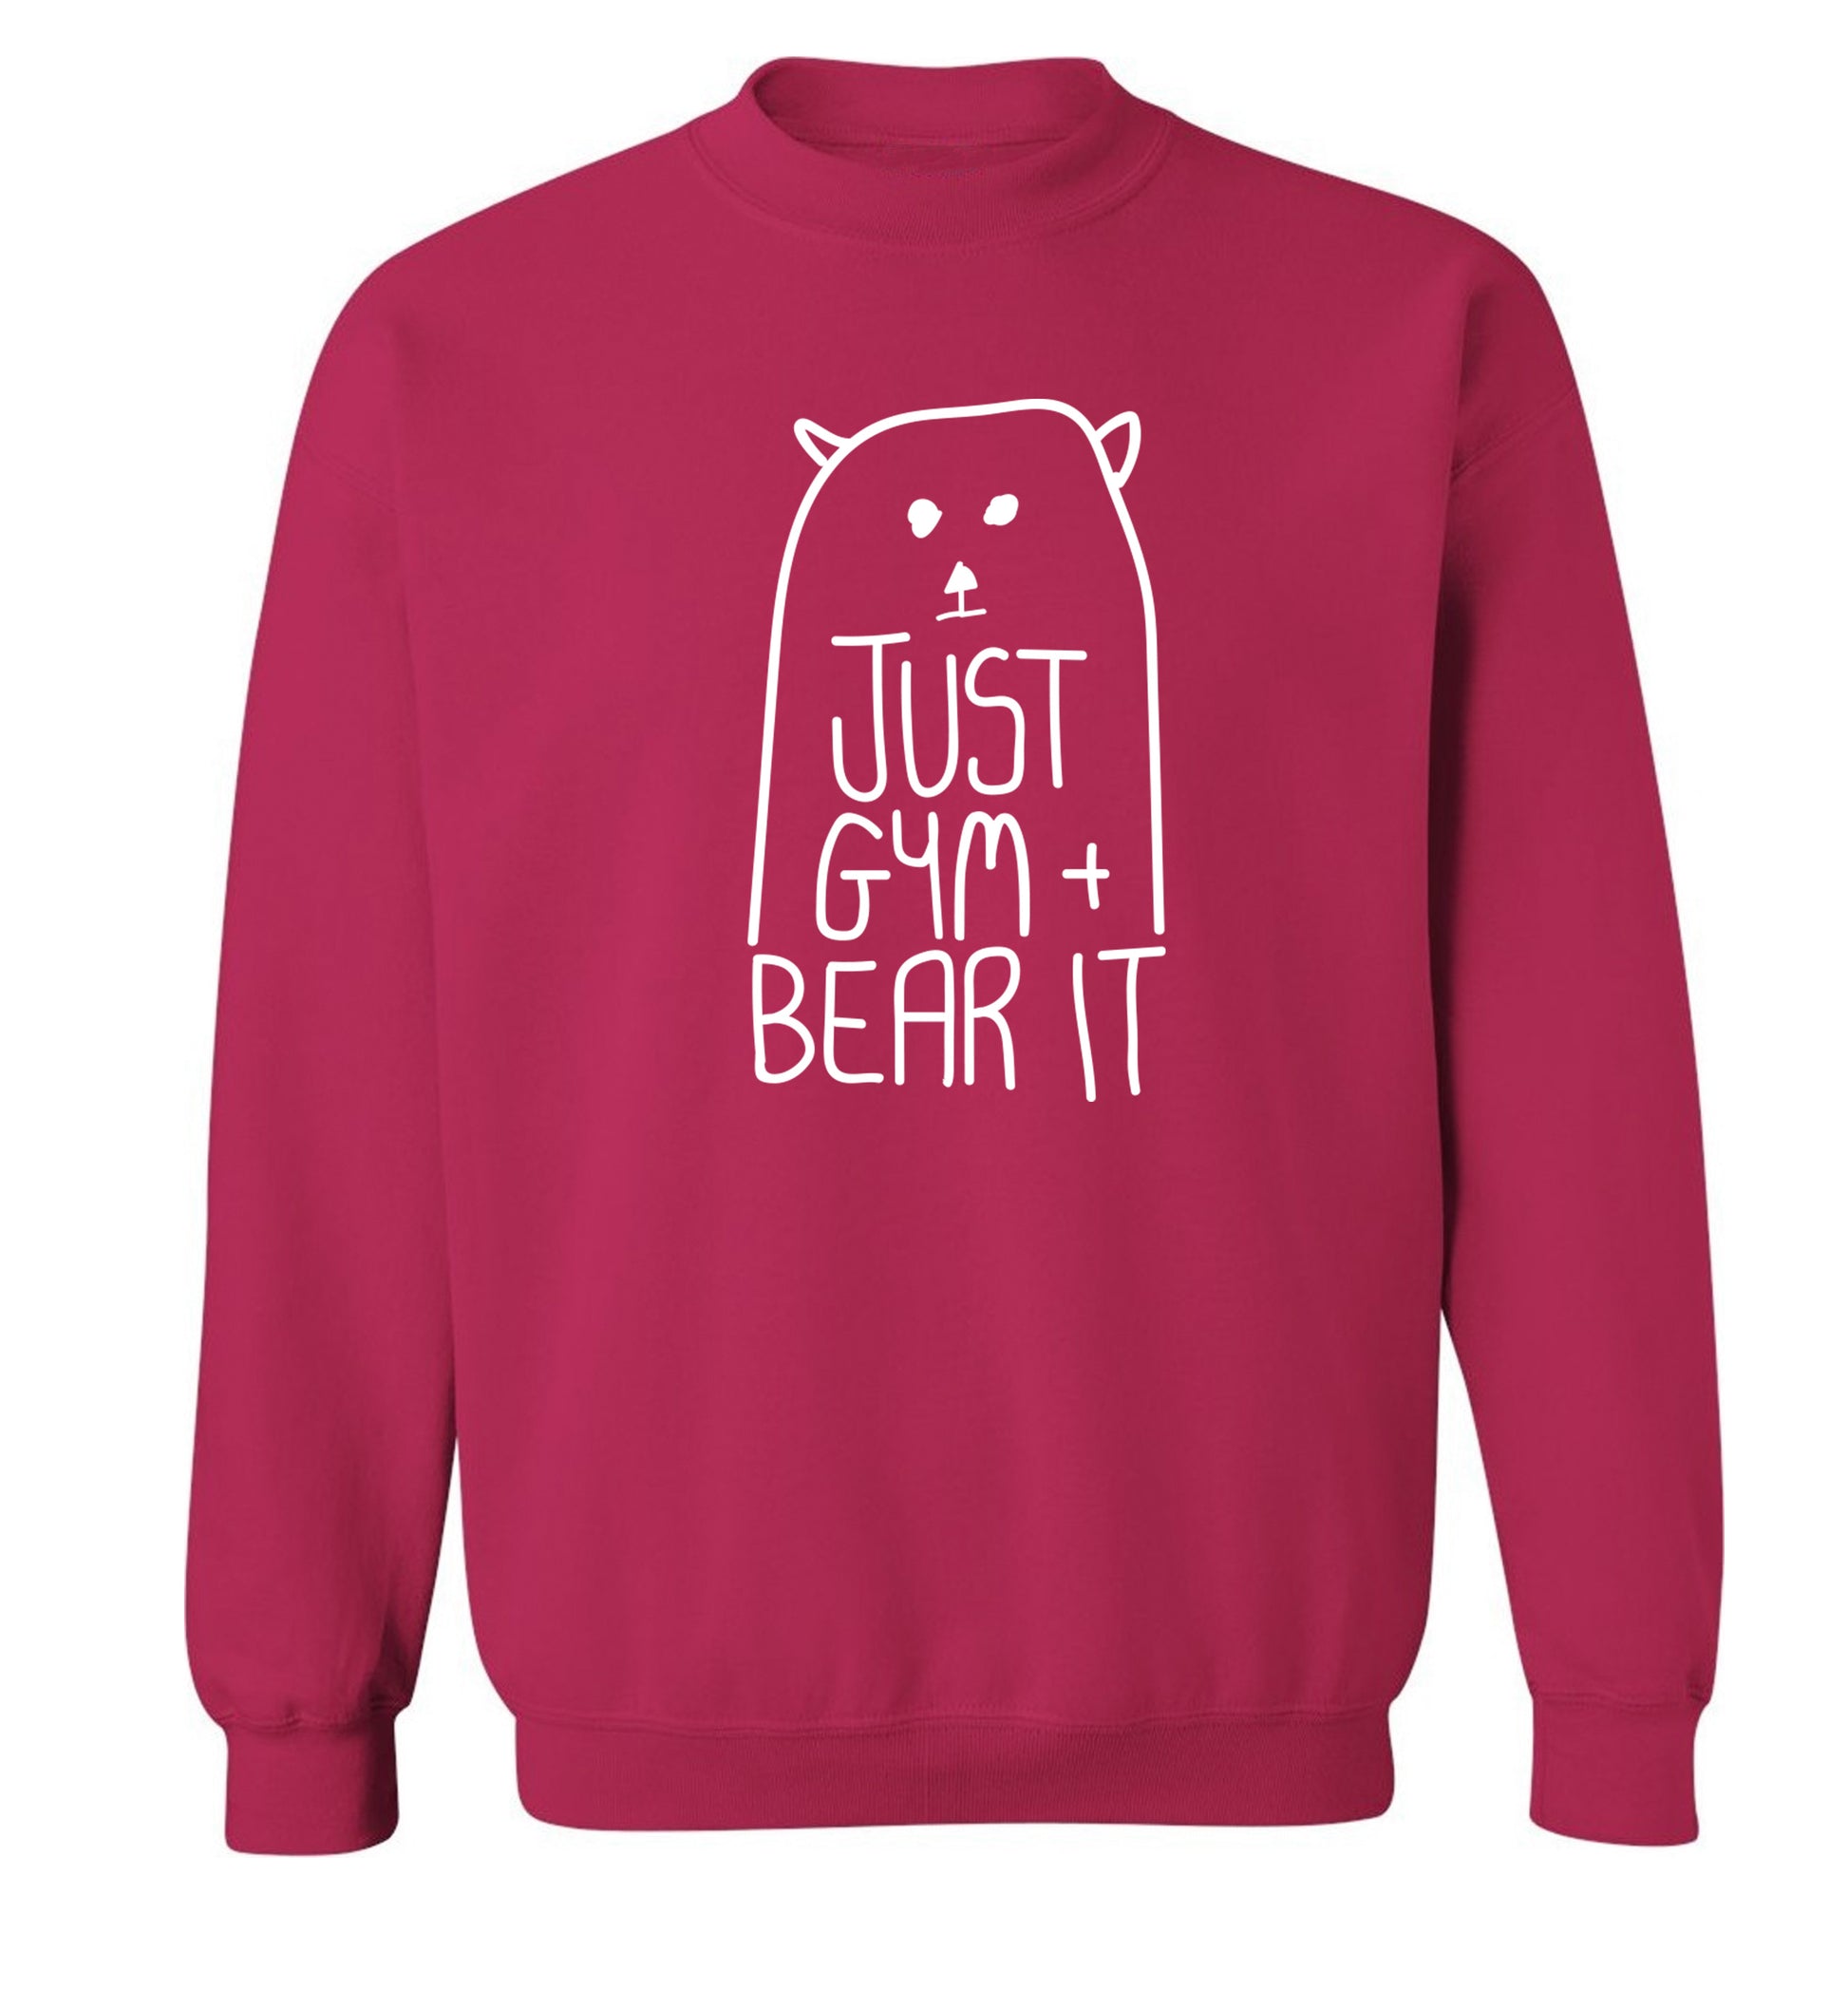 Just gym and bear it Adult's unisex pink Sweater 2XL